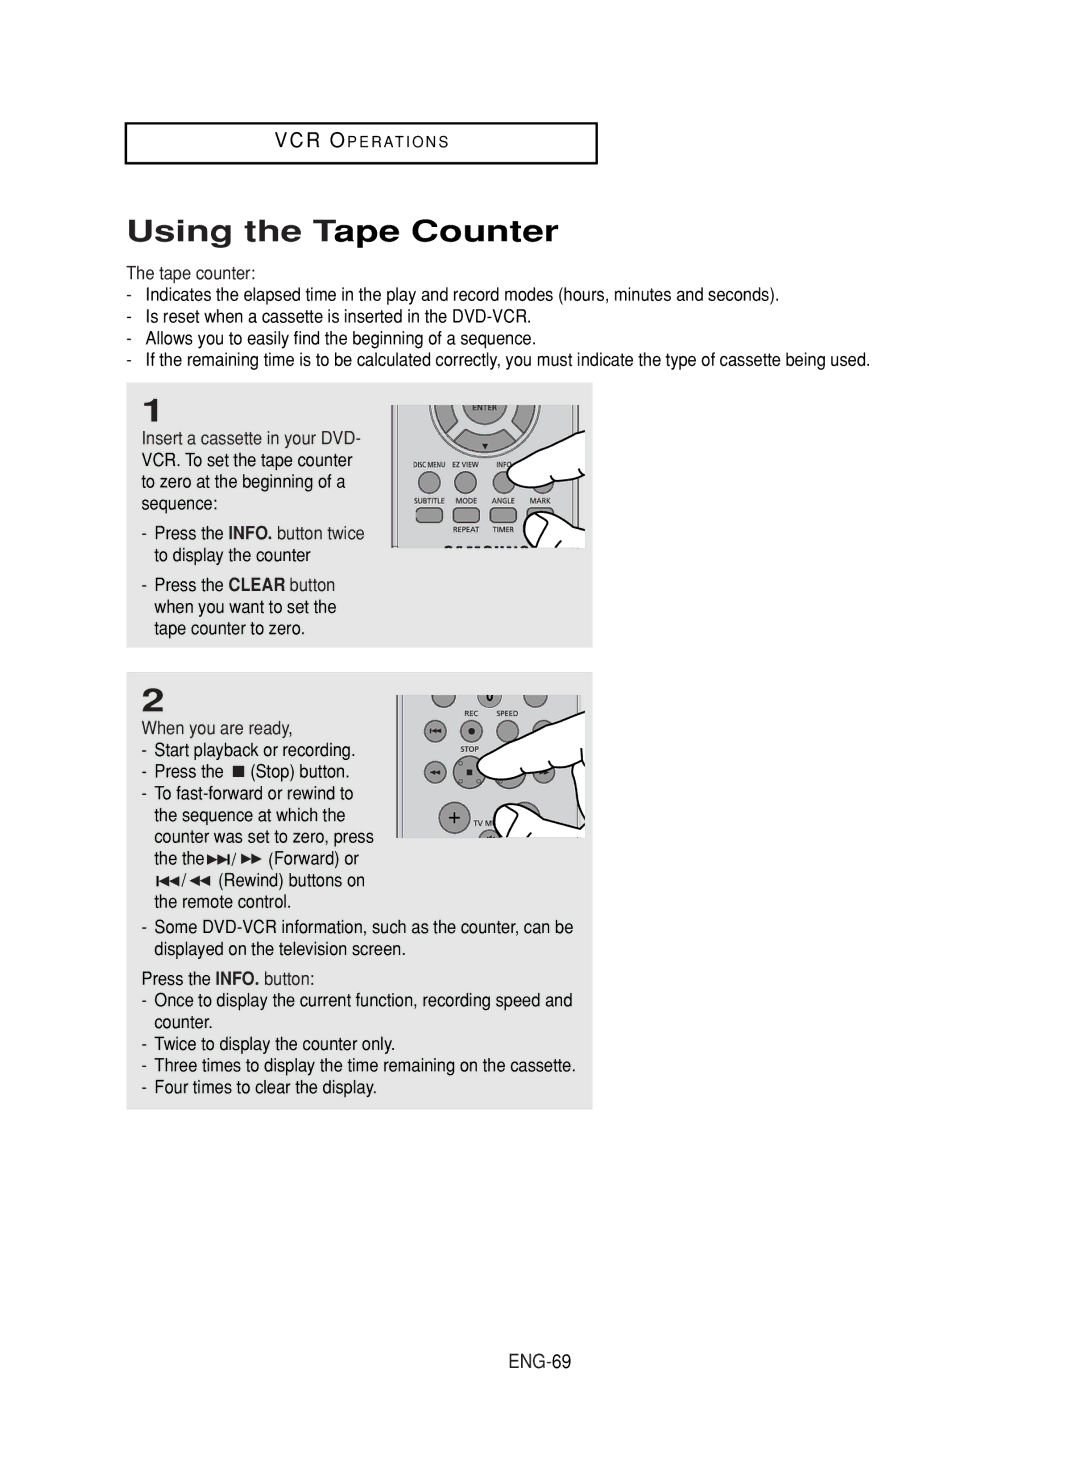 Samsung DVD-V9800 instruction manual Using the Tape Counter, ENG-69, When you are ready 